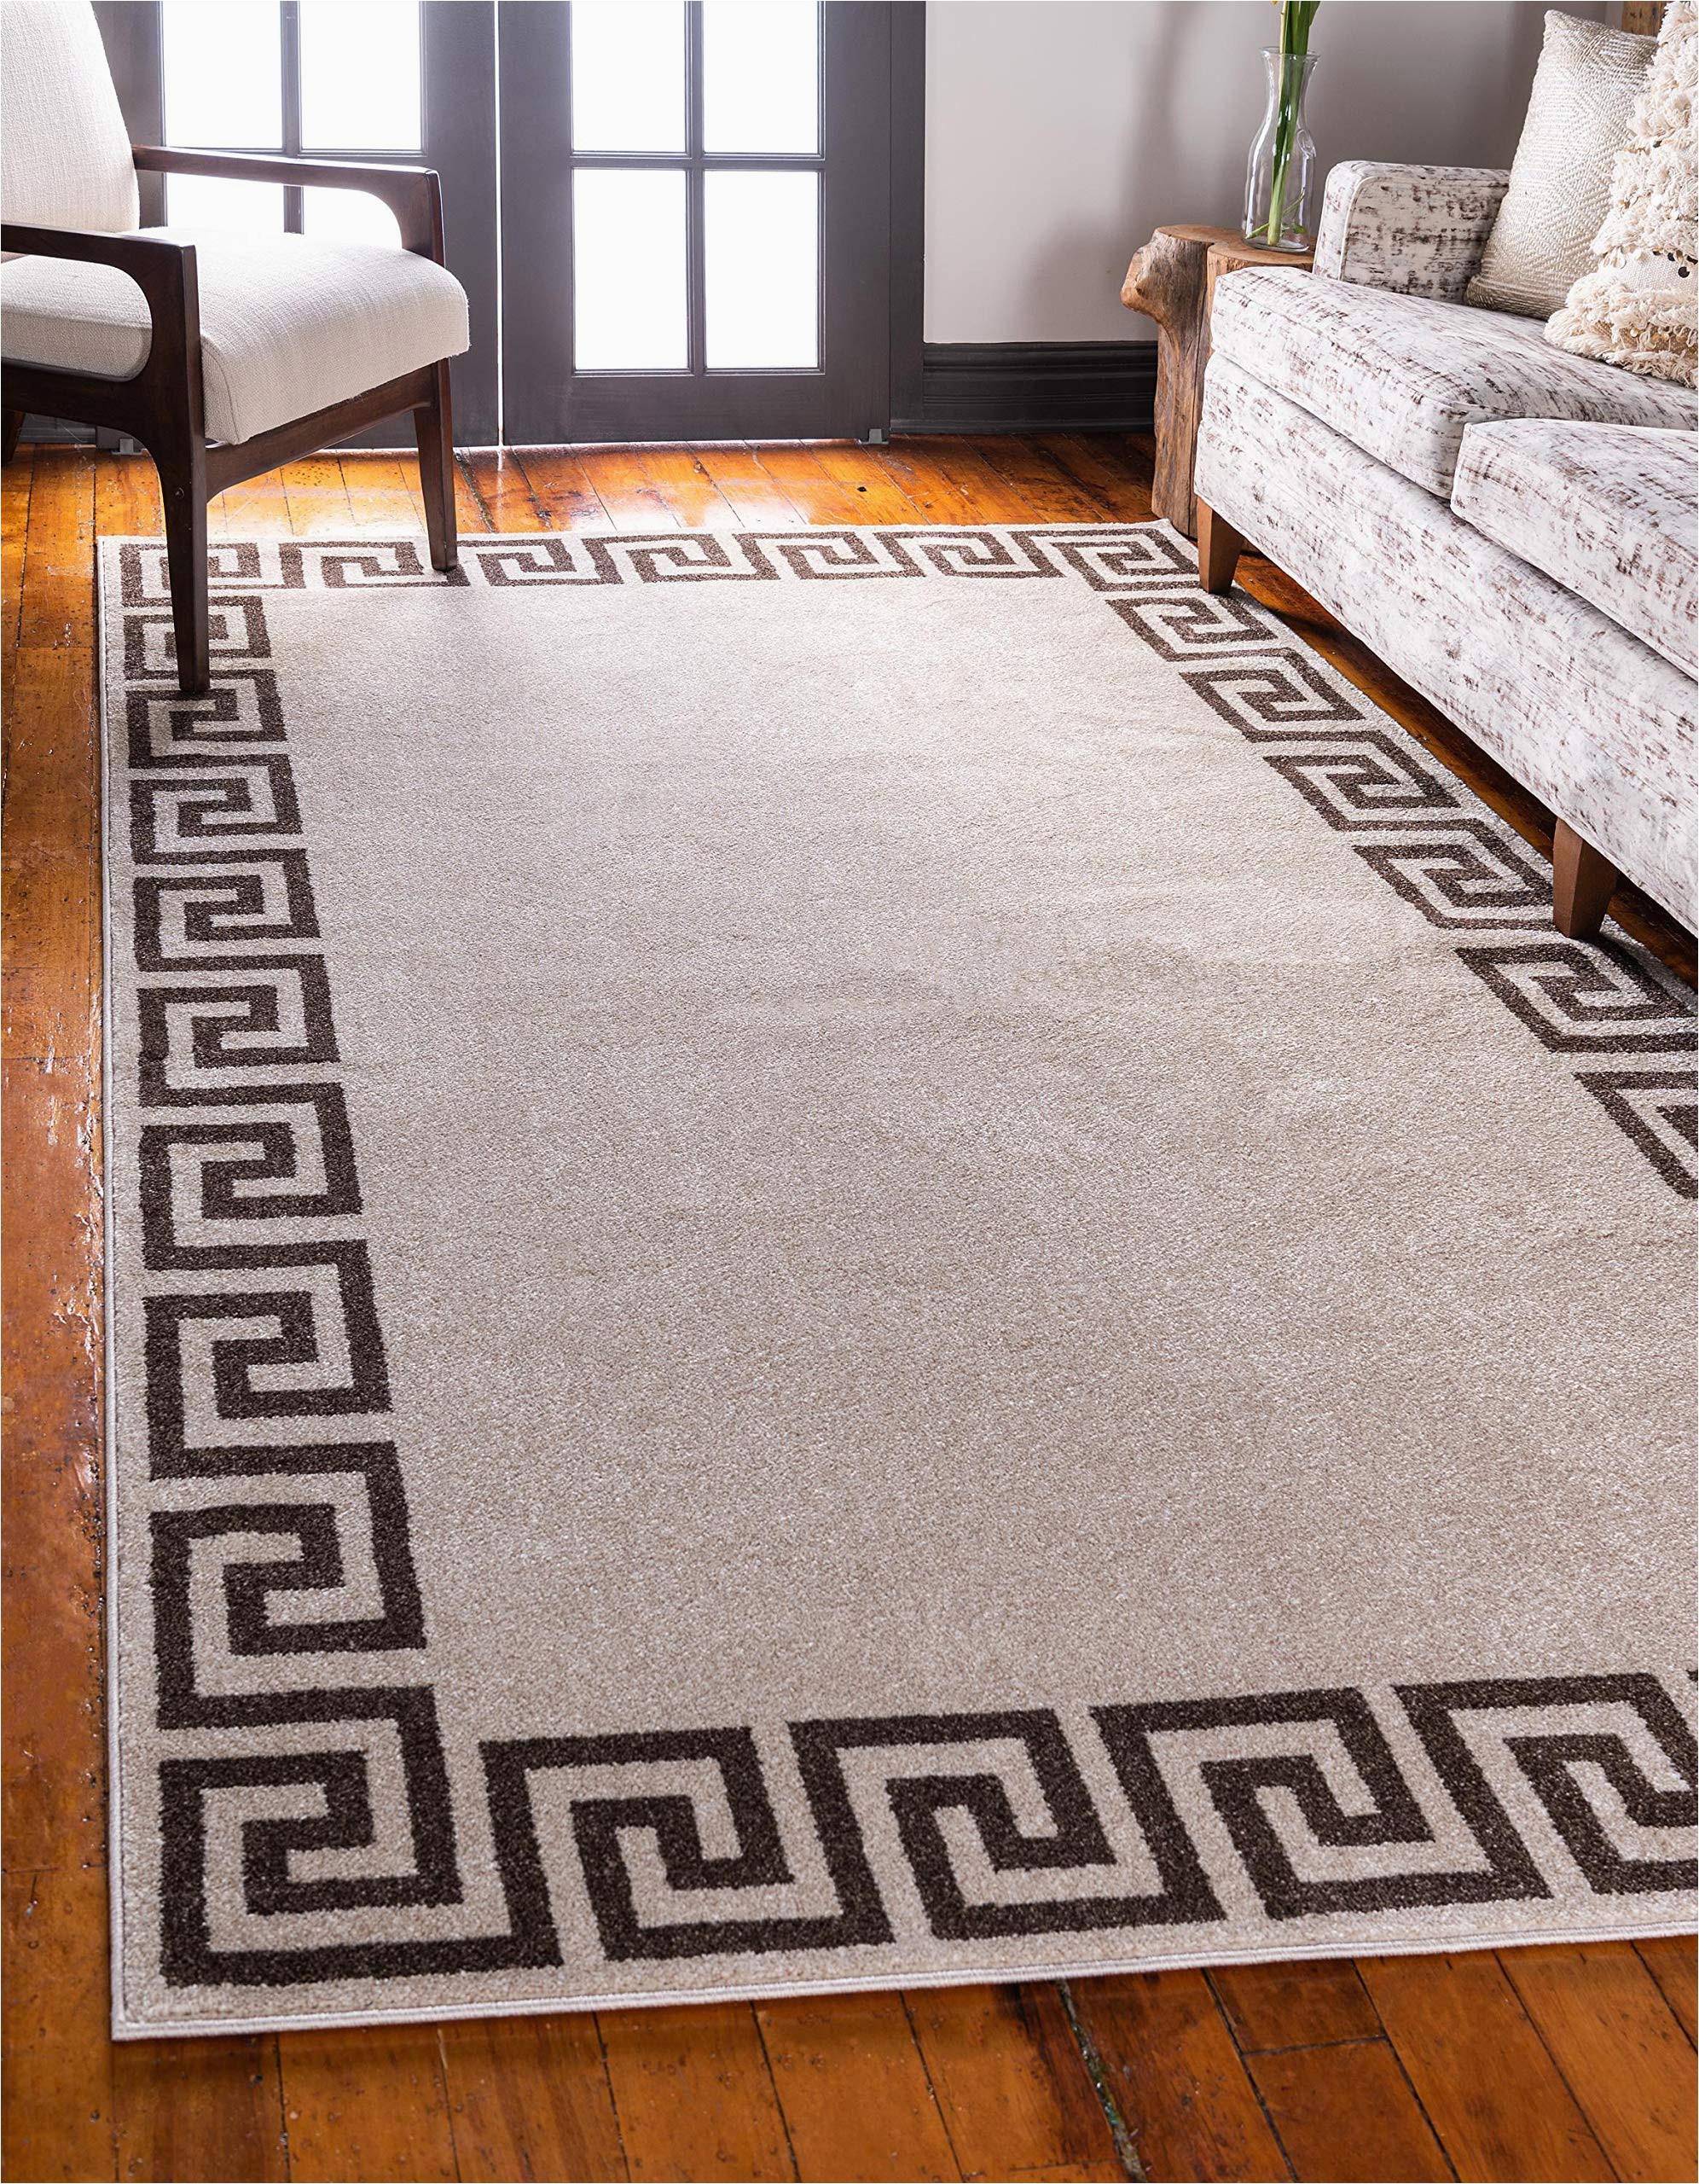 Ann and Hope area Rugs Unique Loom athens Geometric Casual area Rug 5 0 X 8 0 Beige Brown